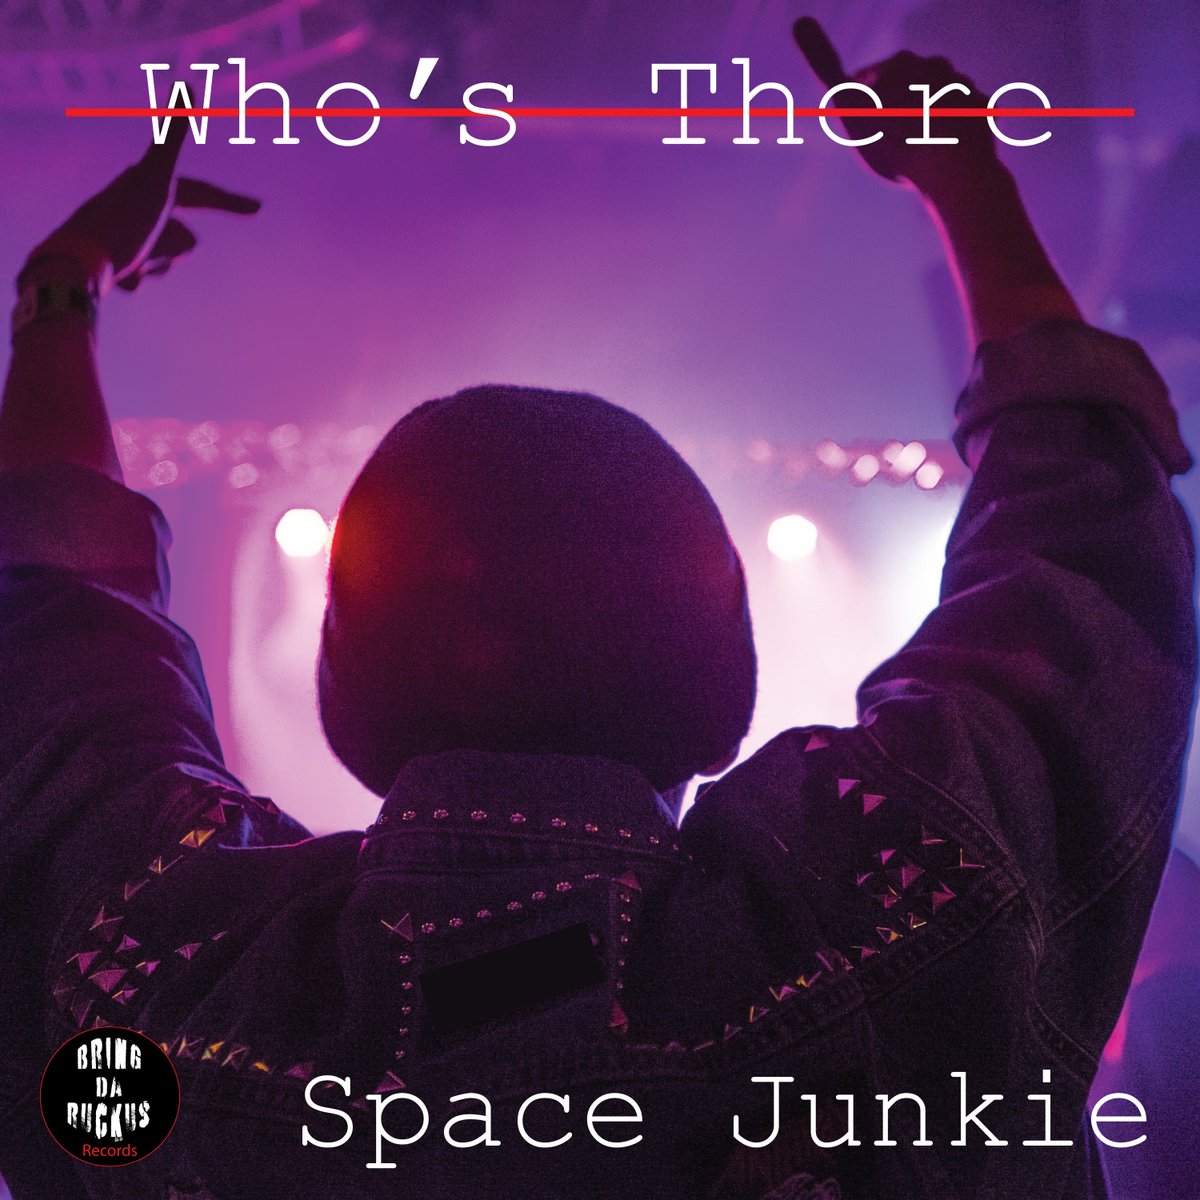 Space Junkie-Who's There. Out Now Grab it Here. beatport.com/release/whos-t… #technomusic #techno #producer #producerlife #newmusic #newmusicalert #music #musicmatters #musiciflife #spotify #beatport #technogirls #rave #ravegirls @emilywiilisxx